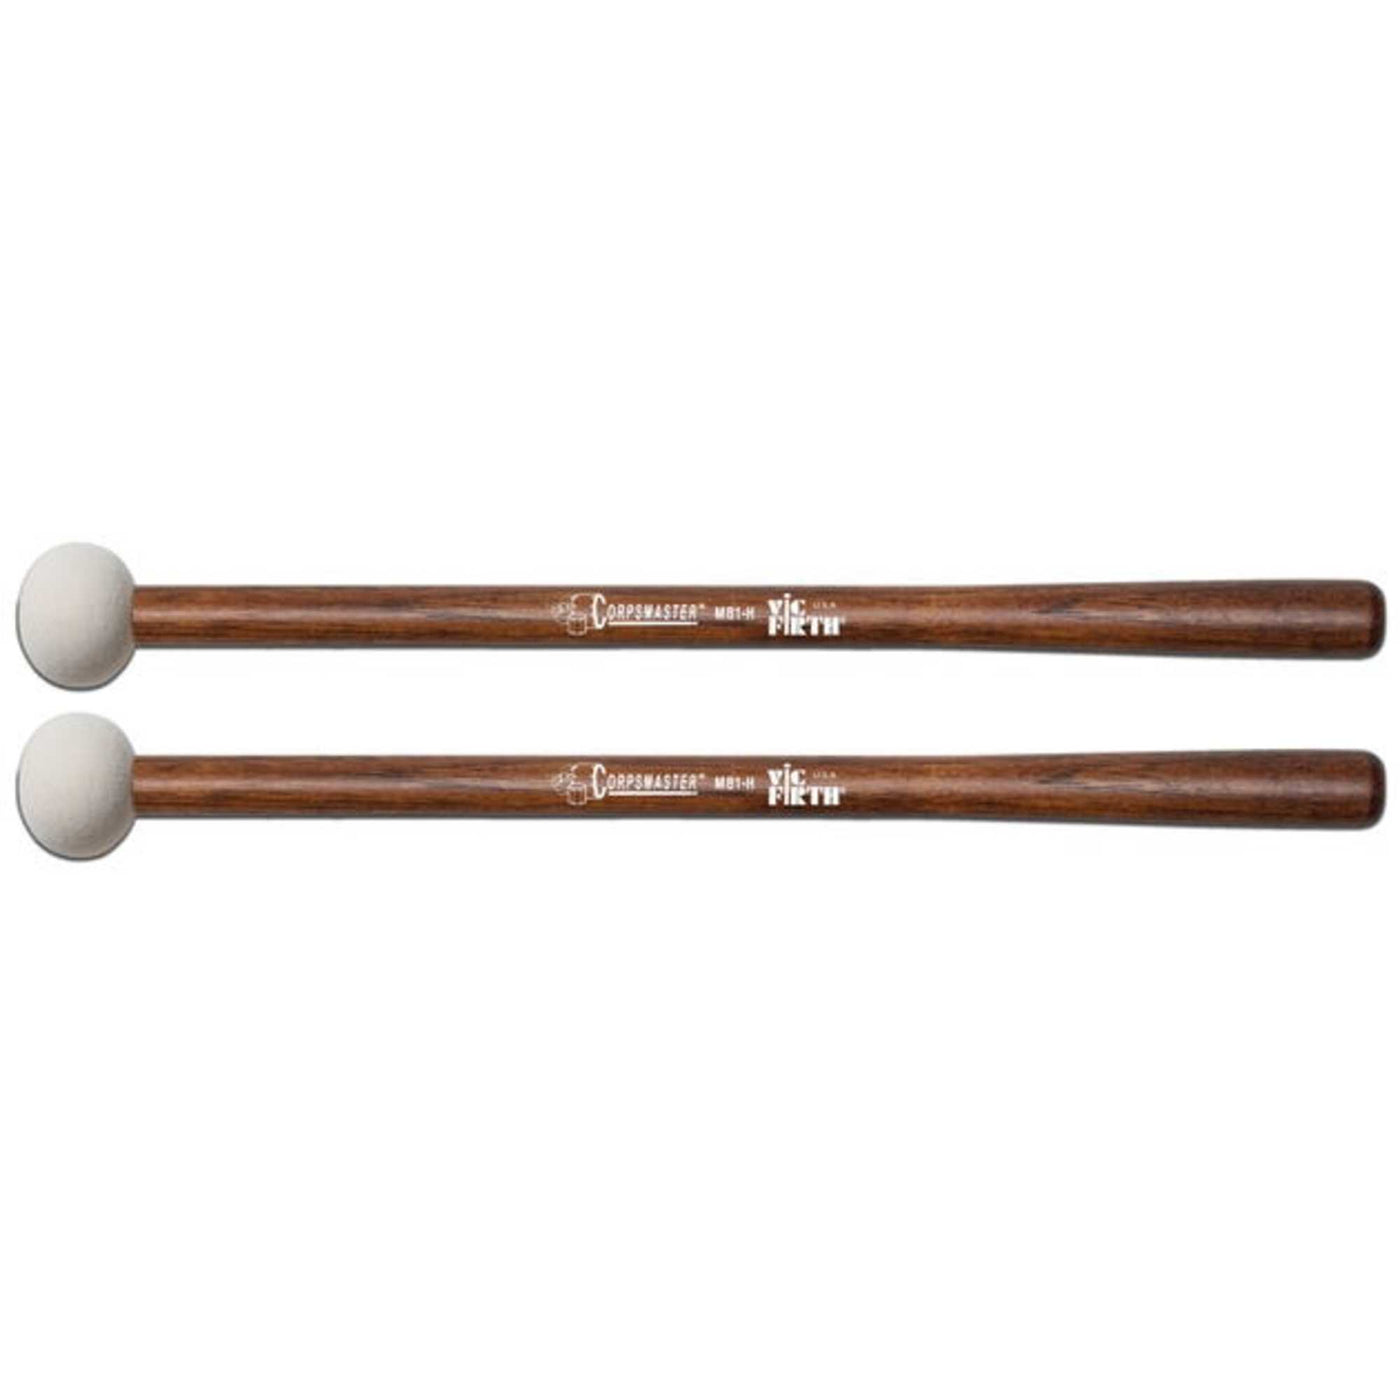 Vic Firth Corpsmaster Bass Mallet - Small Head – Hard Mallets (MB1H)